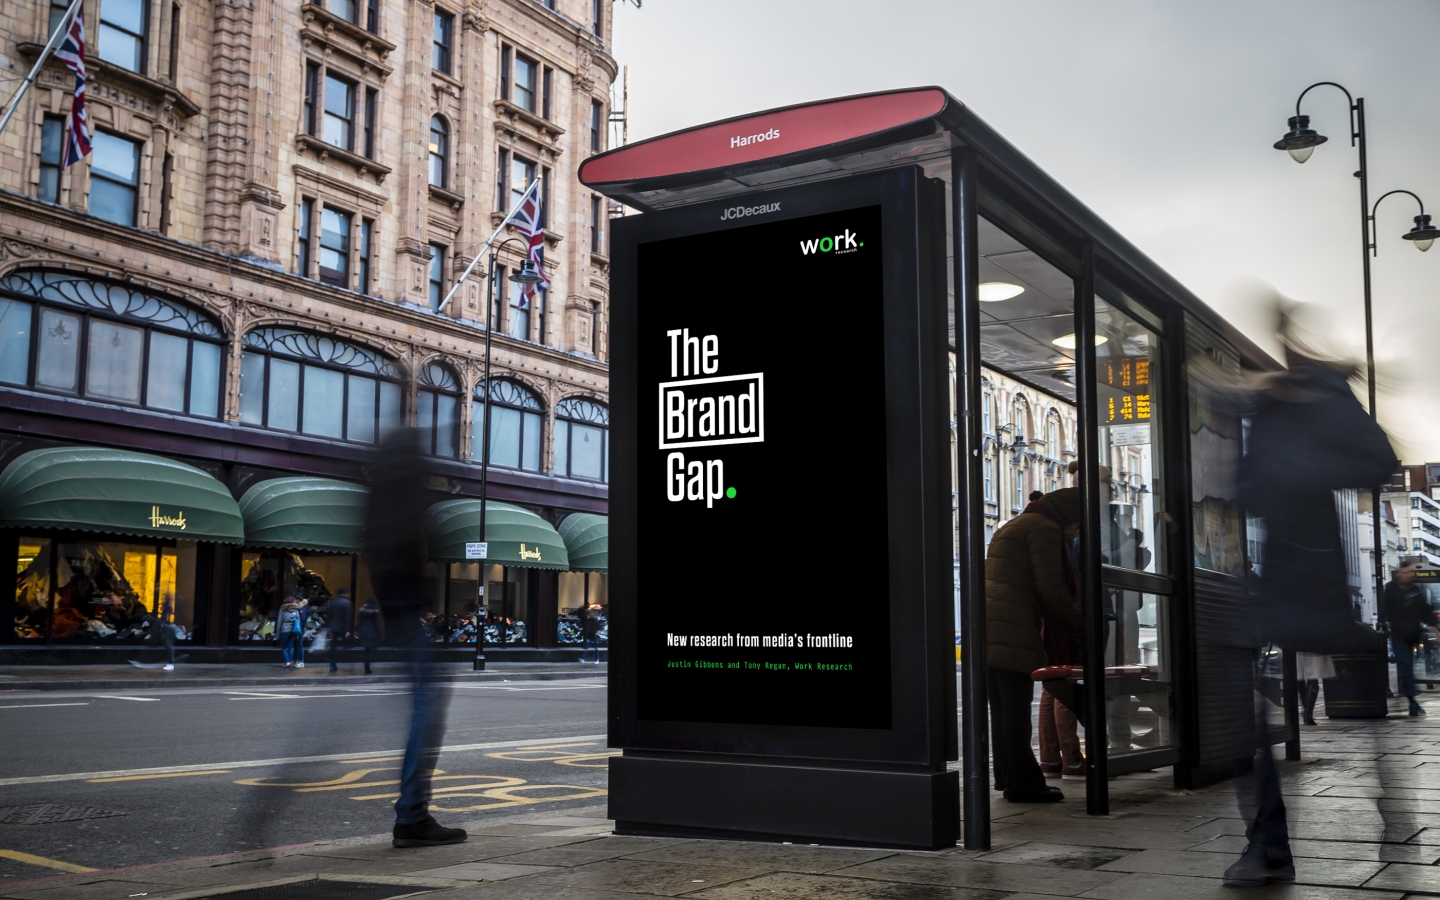 The Brand Gap book cover on JCDecaux UK digital bus shelter